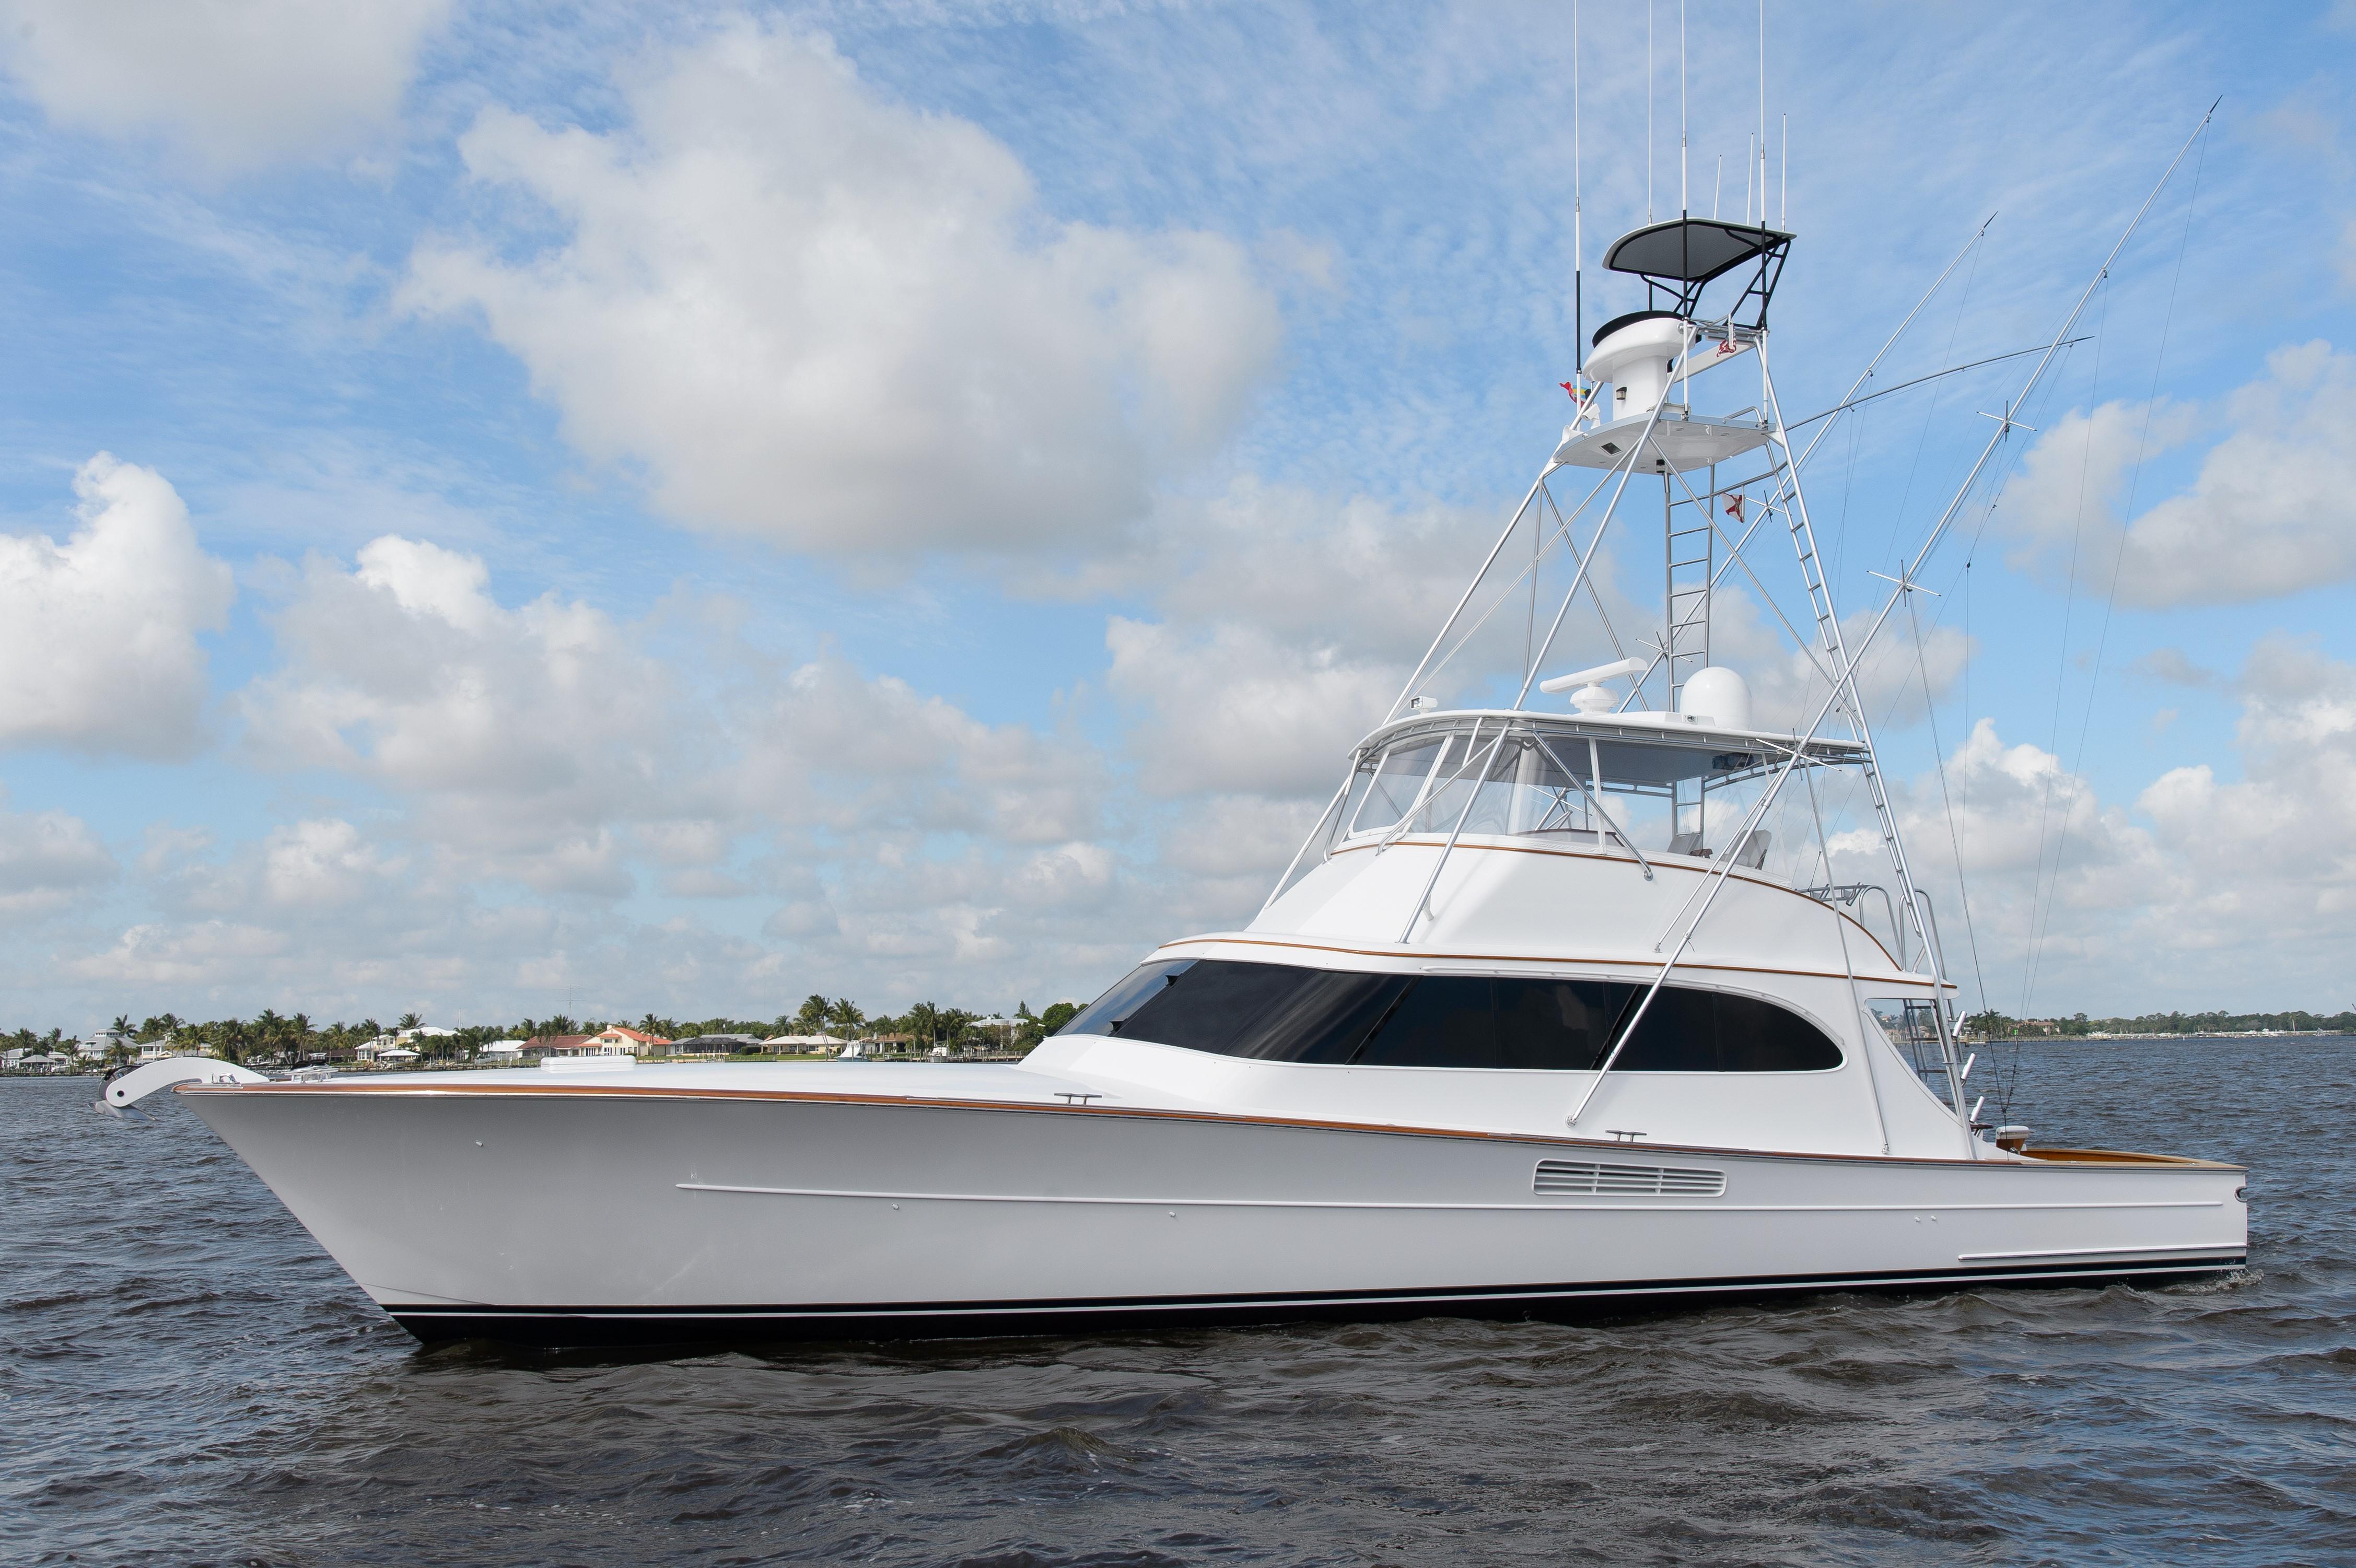 58 ft motor yacht for sale